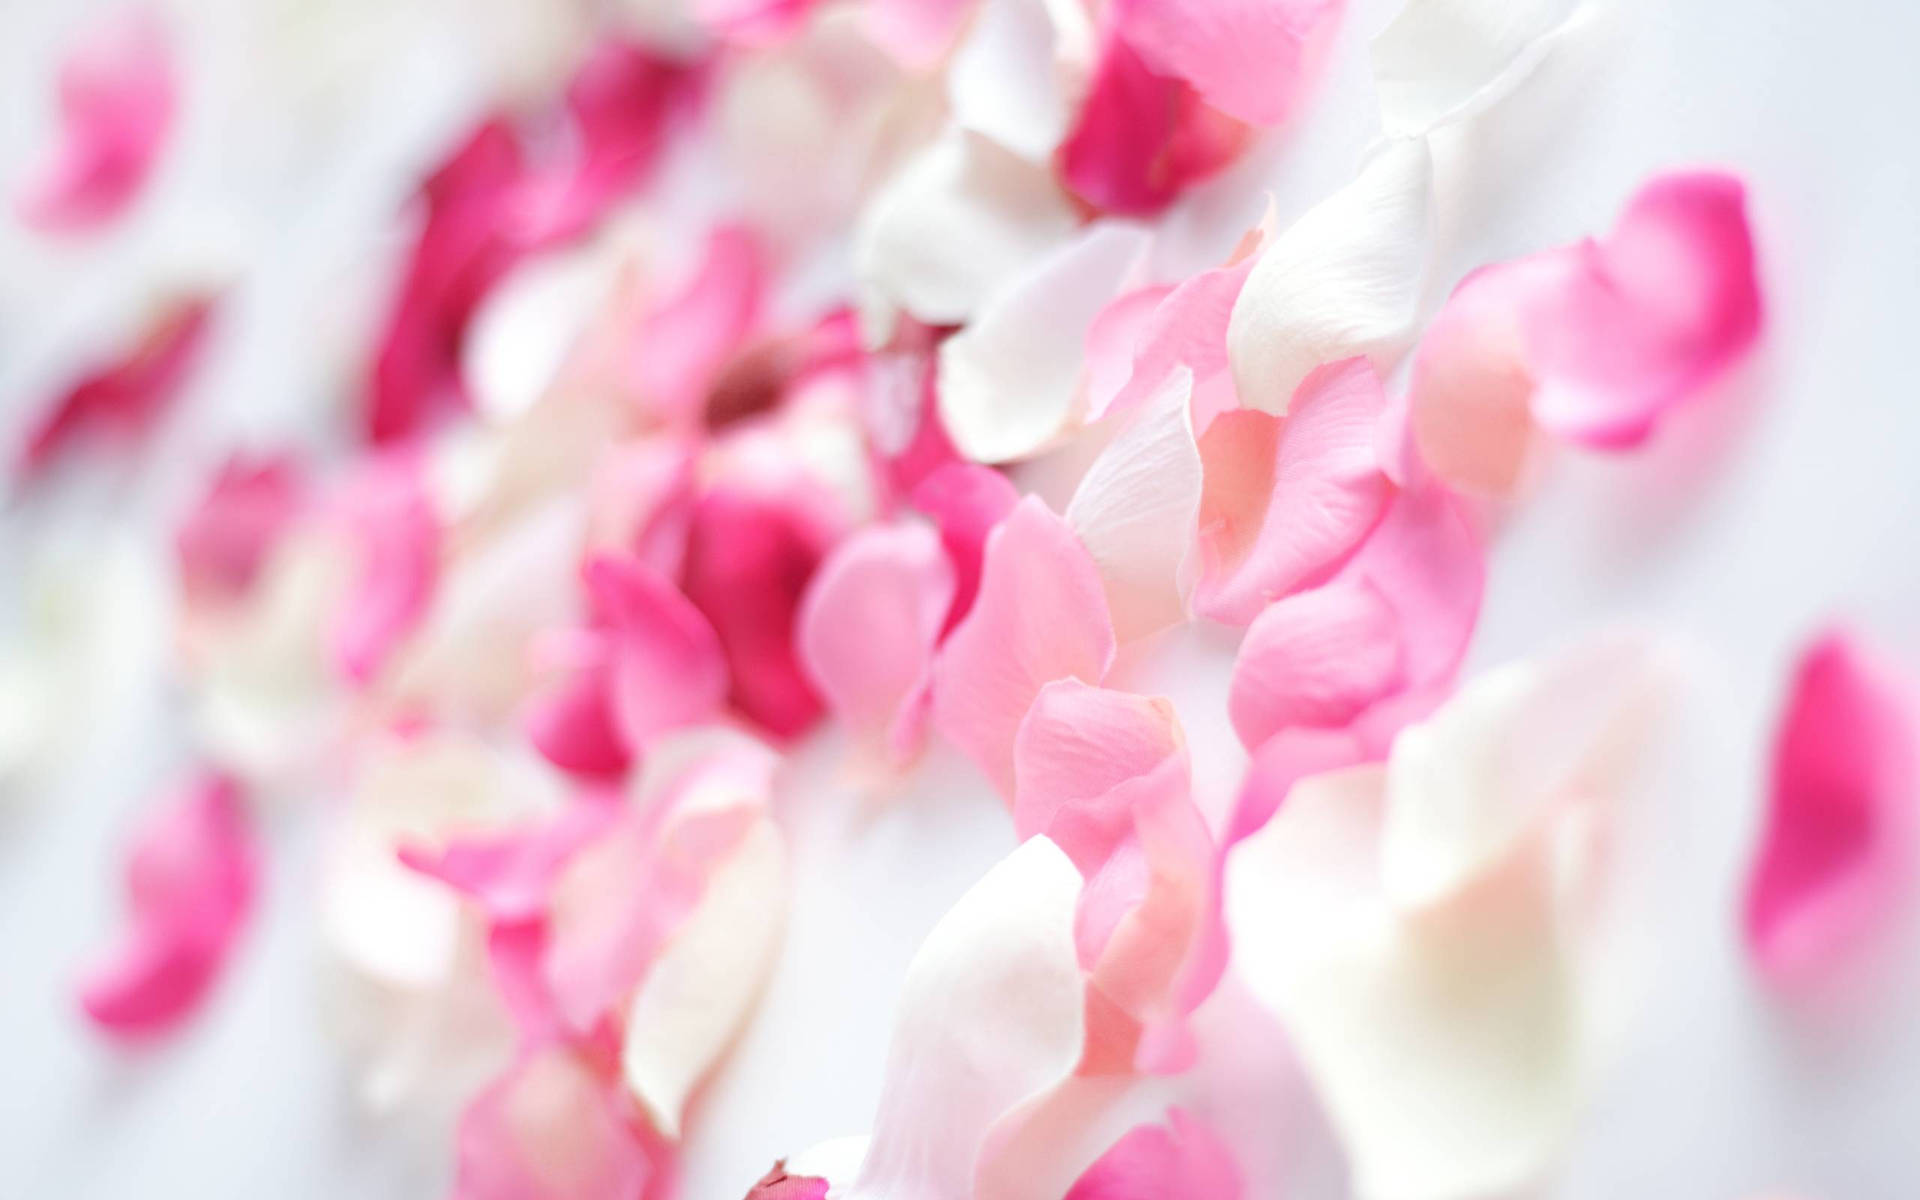 Caption: "Blooming Beauty: Delicate Pink Flower with Sideways Petals" Wallpaper